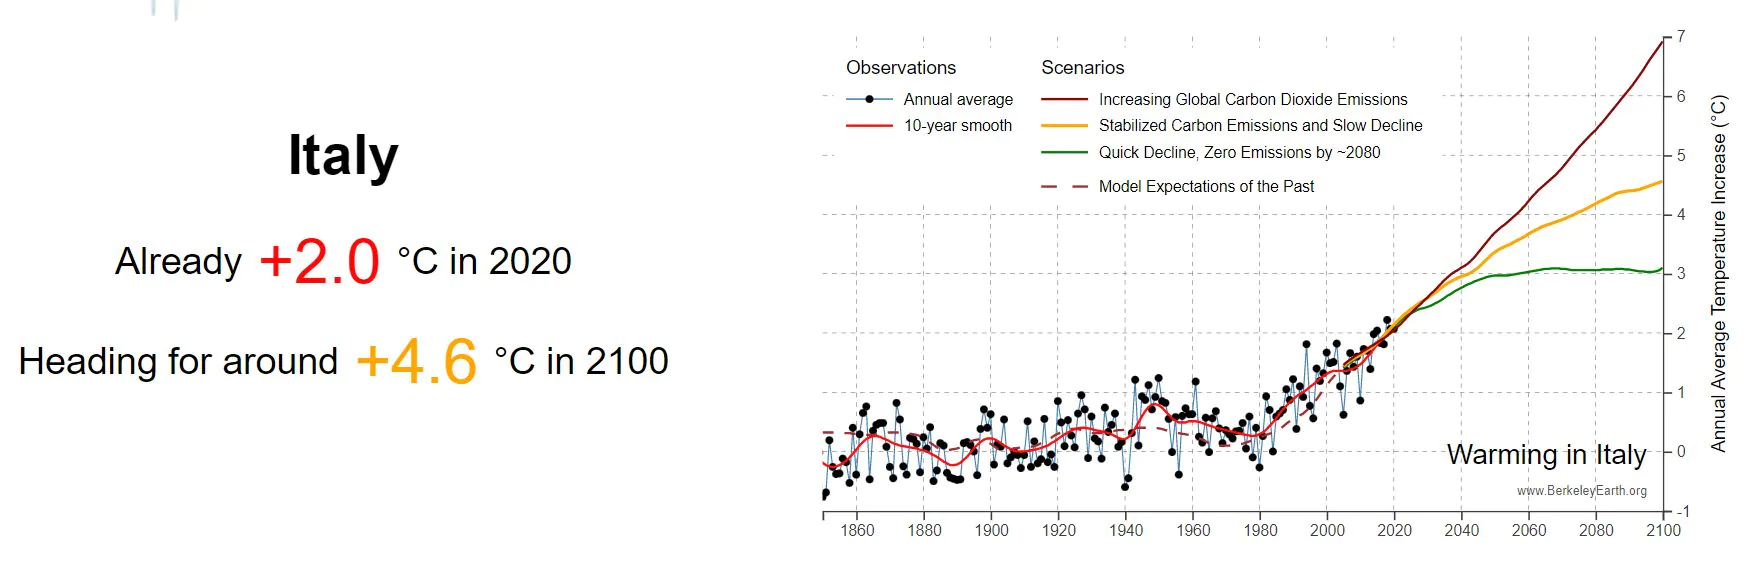 The increase in the average temperature in Italy compared to the pre-industrial era